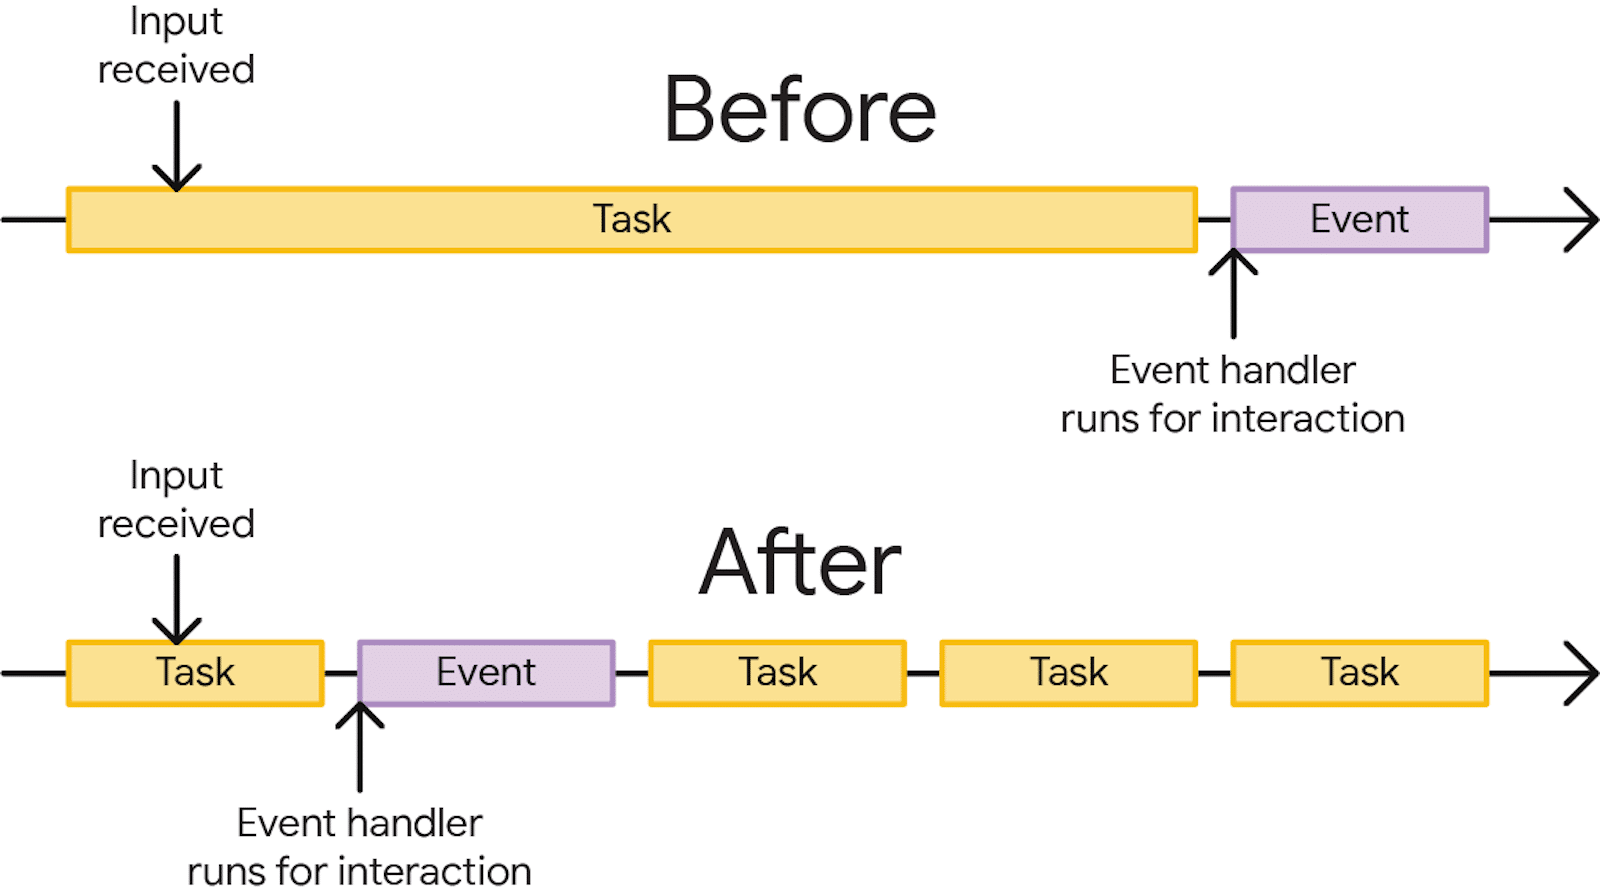 A visualization of what happens to interactions when tasks are too long and the browser can't respond quickly enough to interactions, versus when longer tasks are divided into smaller ones